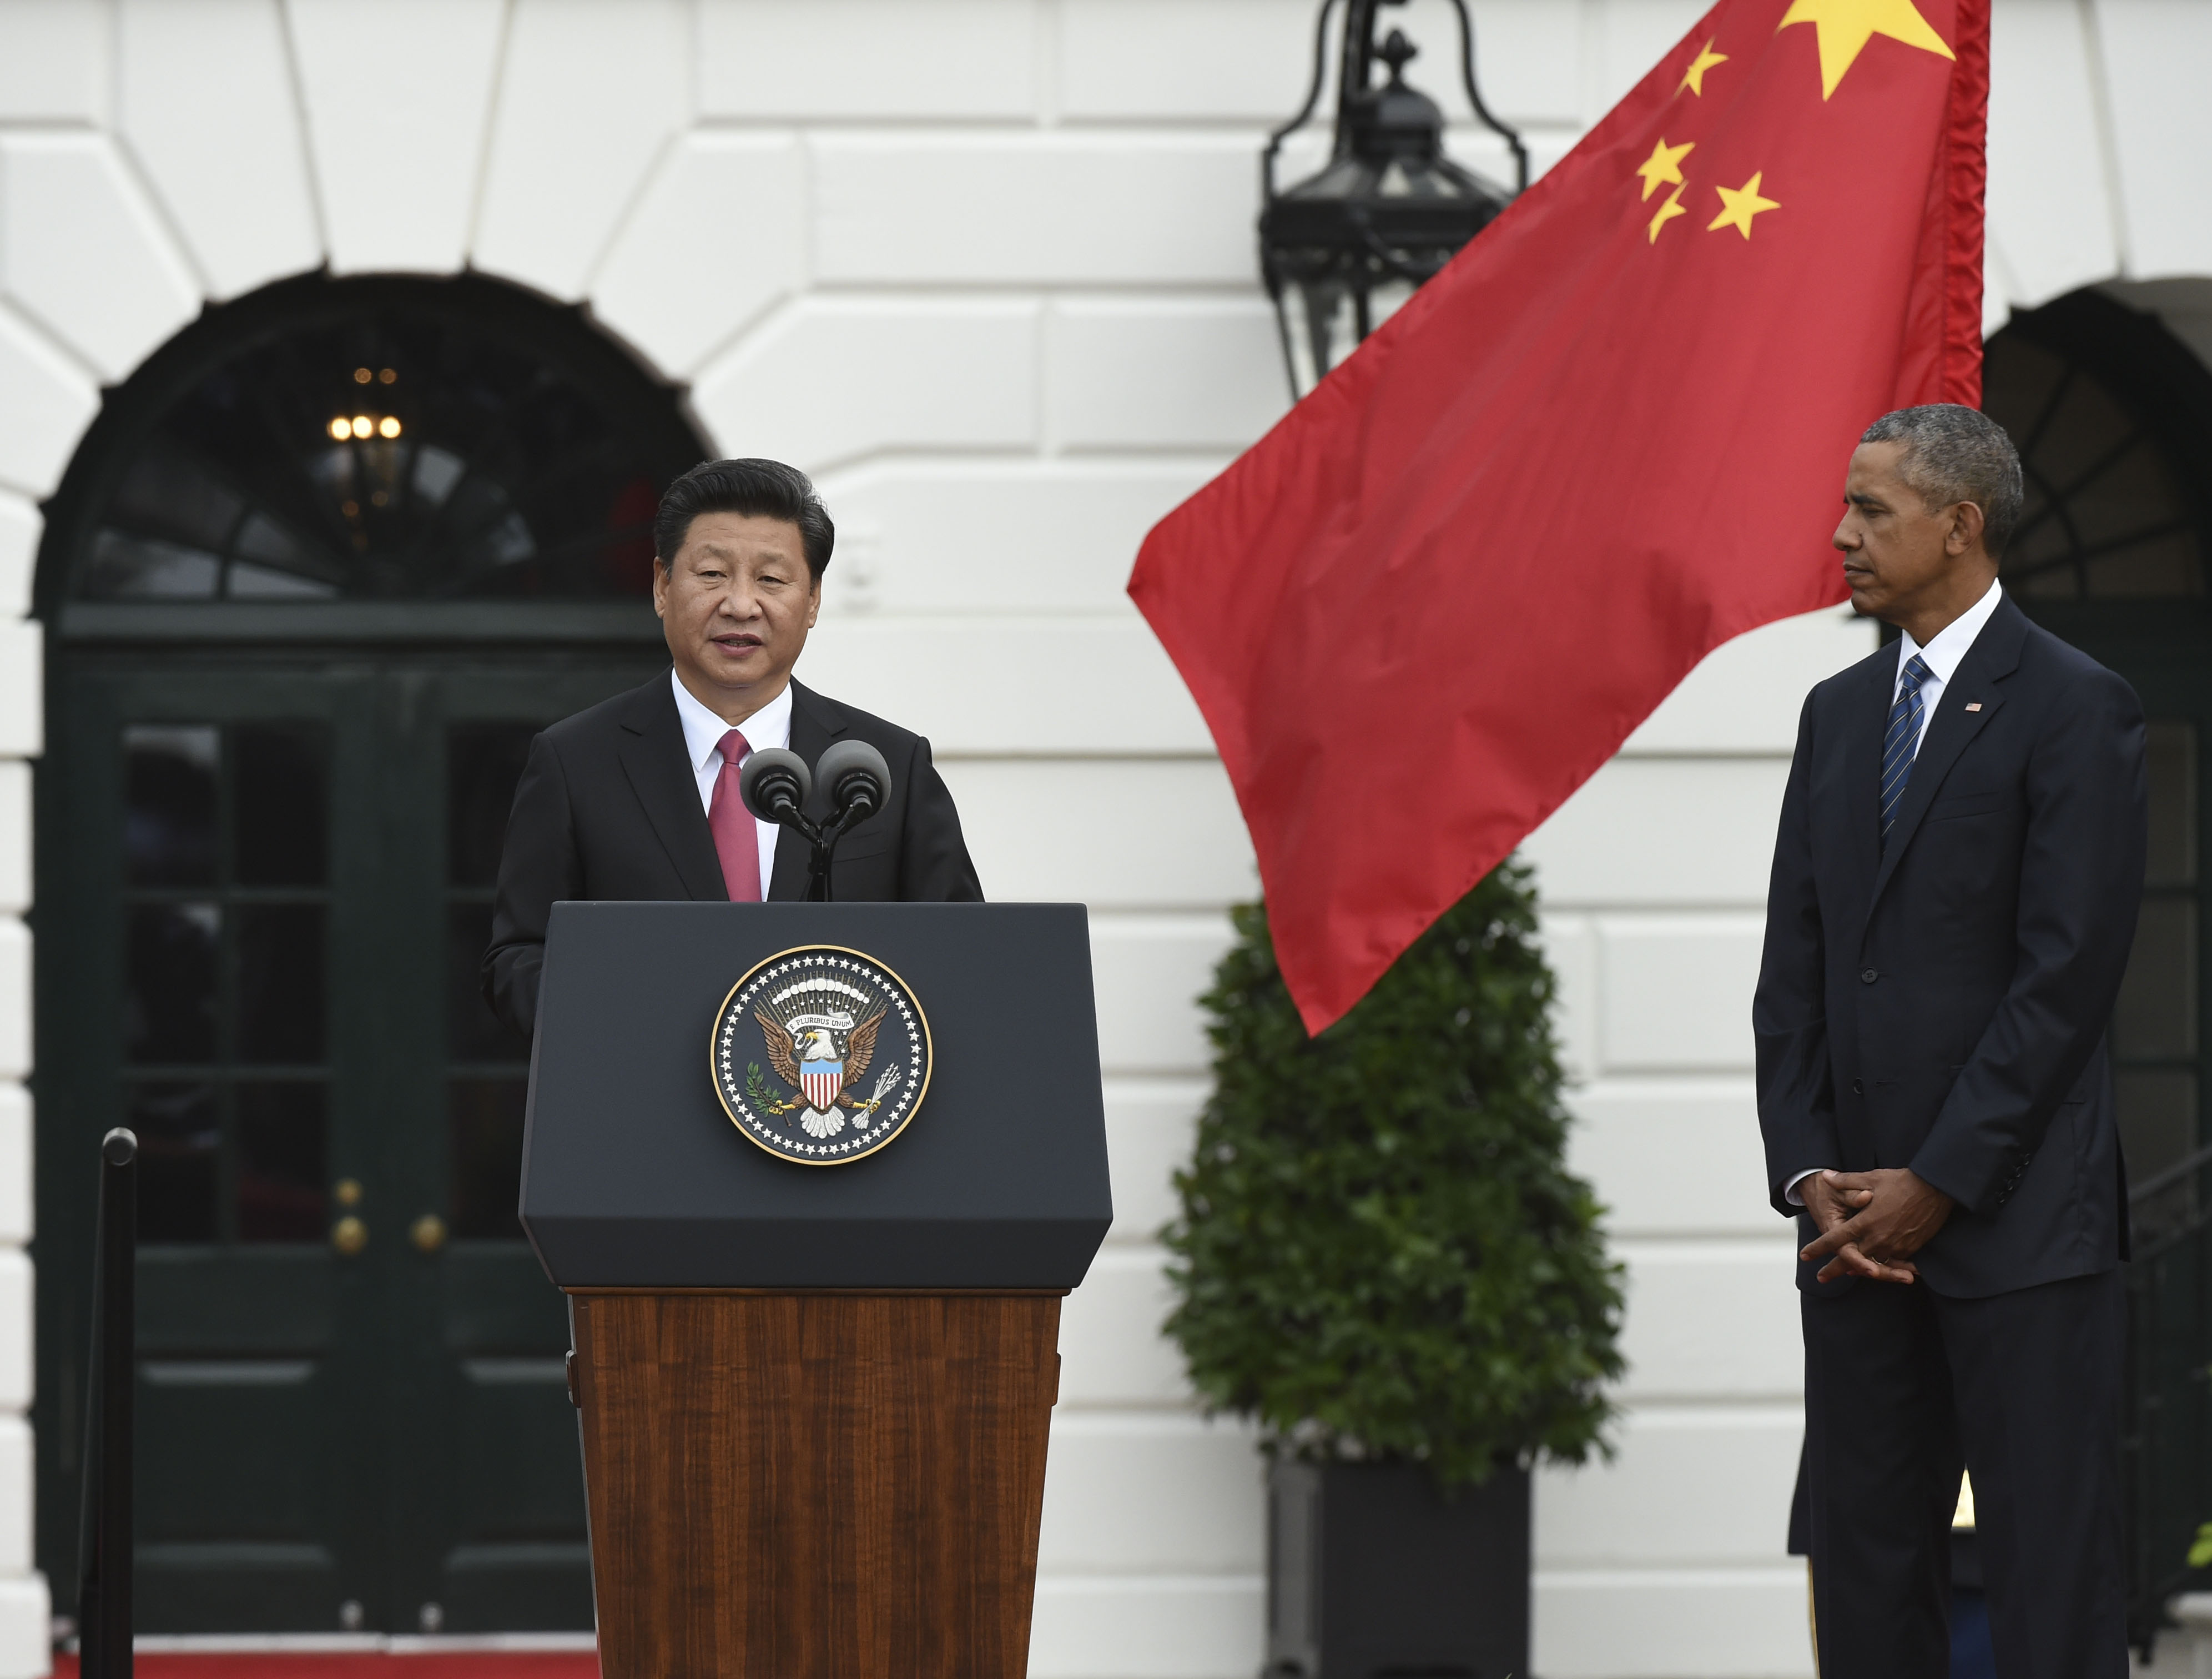 Chinese President Xi Jinping addresses a welcome ceremony held by US President Barack Obama at the South Lawn of the White House in Washington D.C. on Friday. Photo: Xinhua